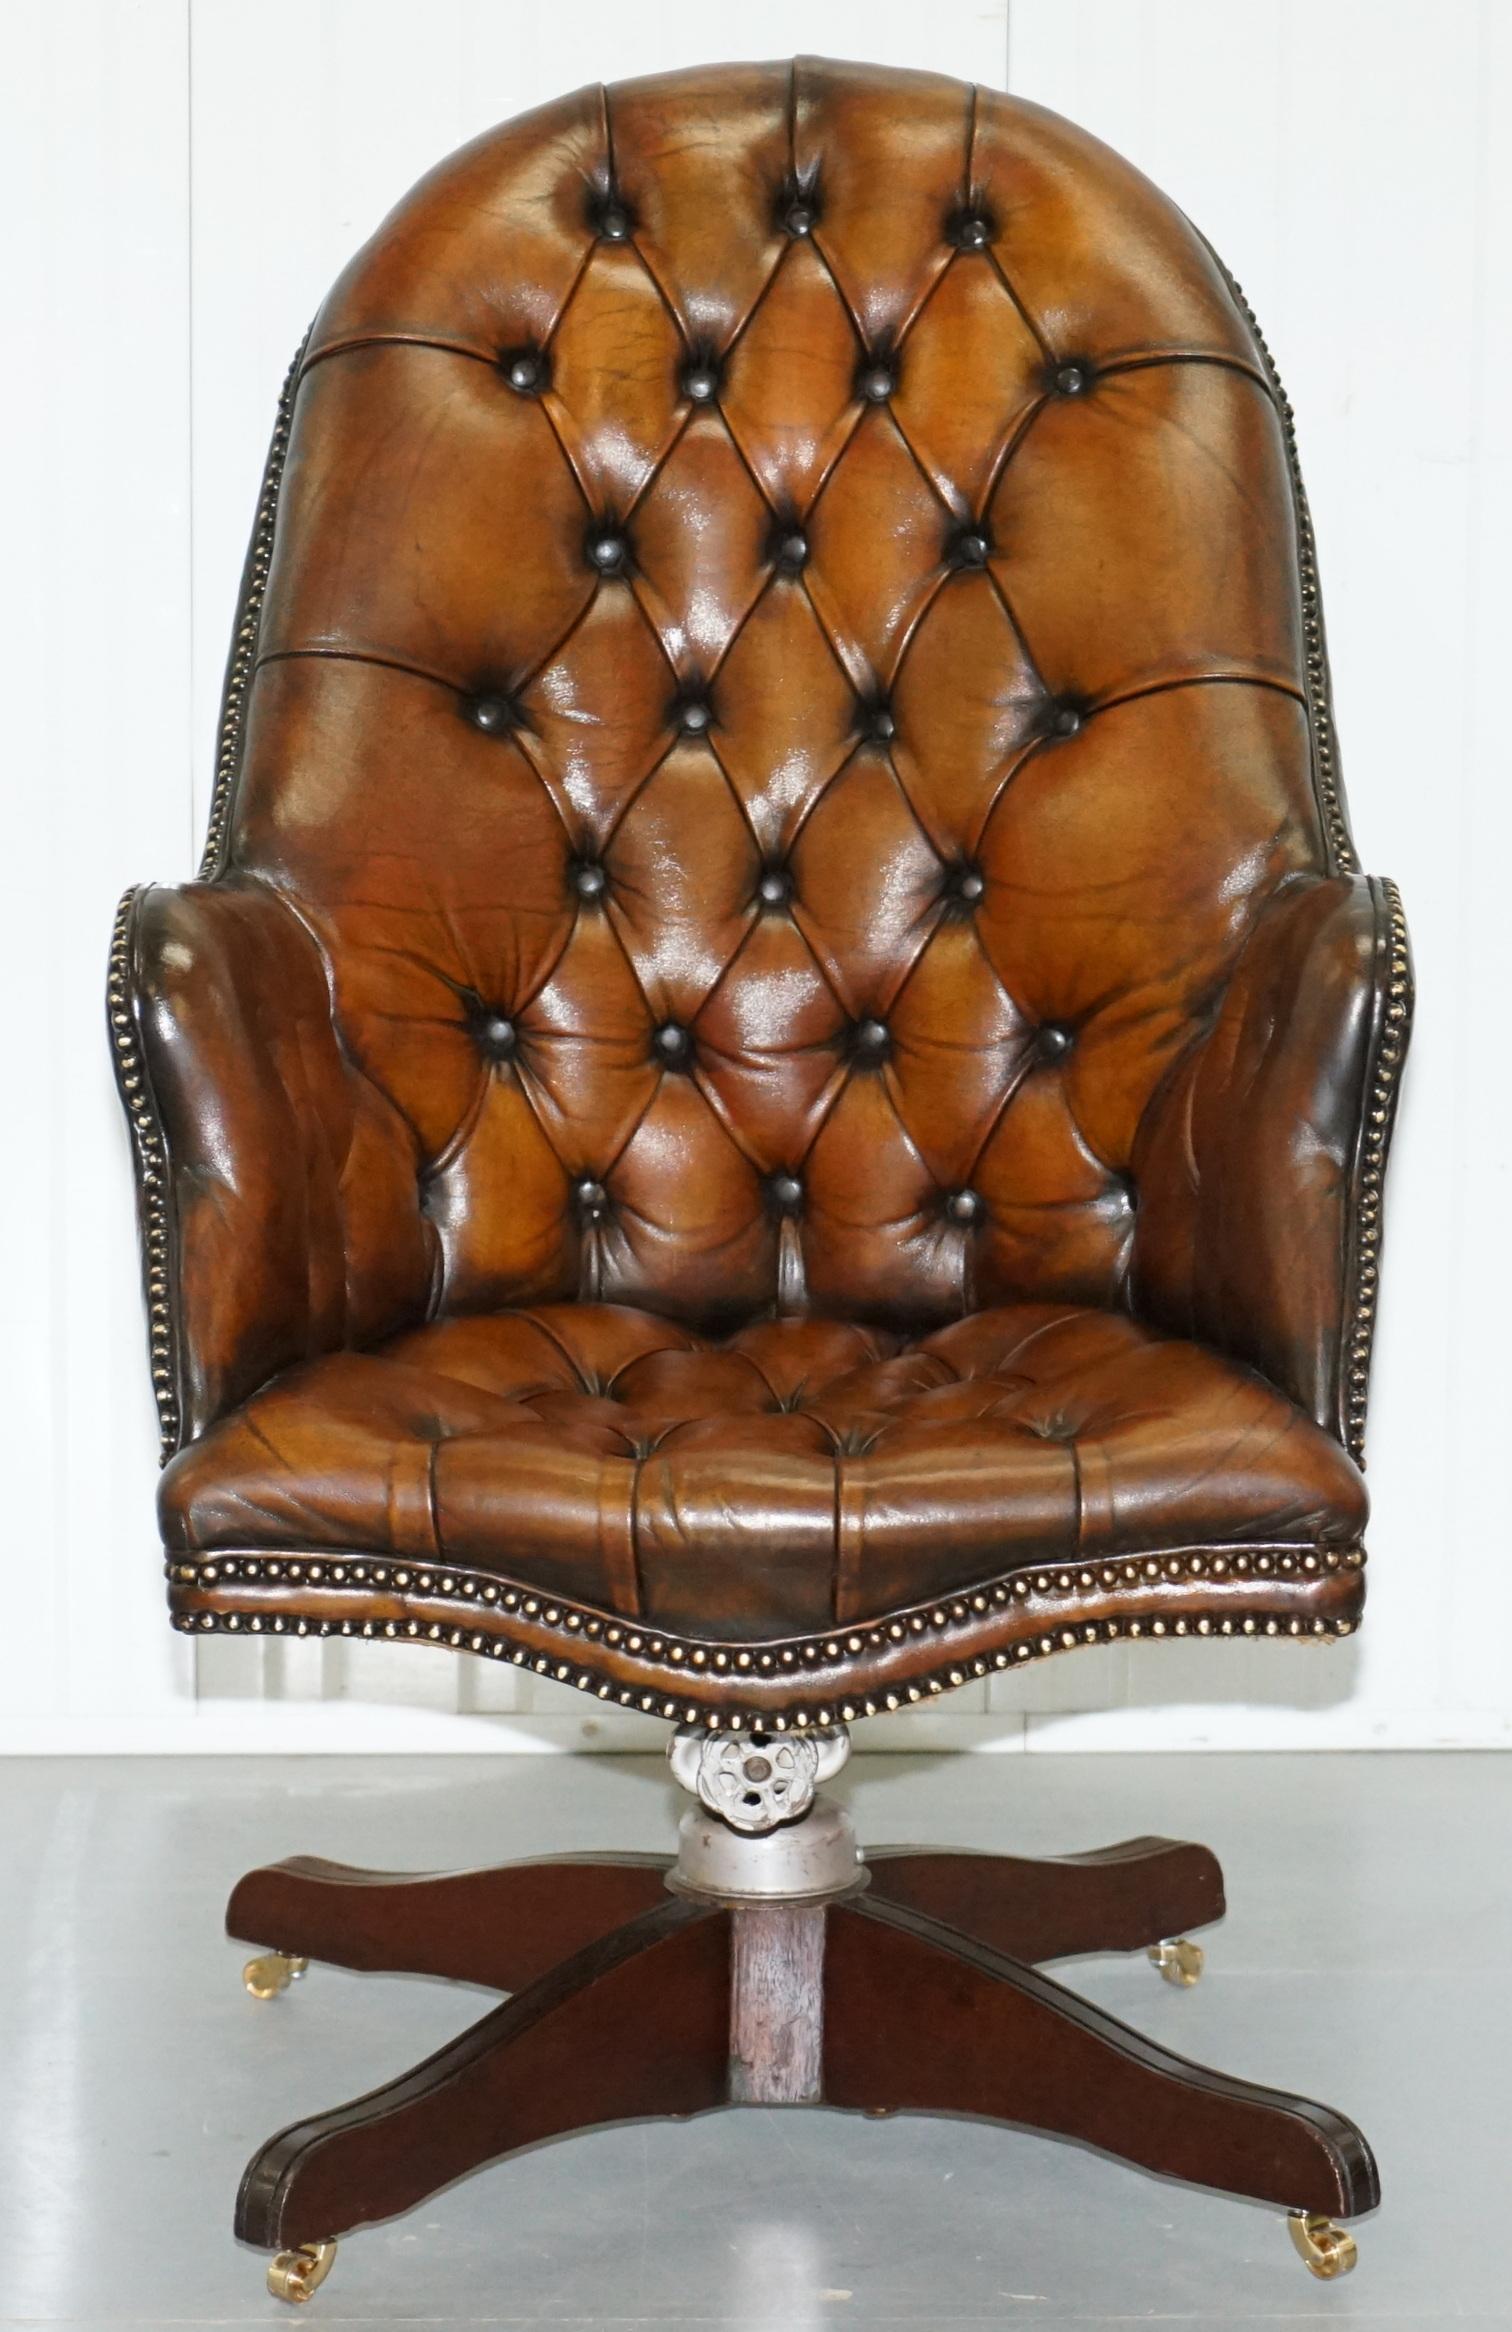 We are delighted to offer for sale this lovely very rare fully restored Vintage Hillcrest 1920s Chesterfield fully buttoned hand dyed mahogany brown leather captains chair 

Please note the delivery fee listed is just a guide and covers inside the